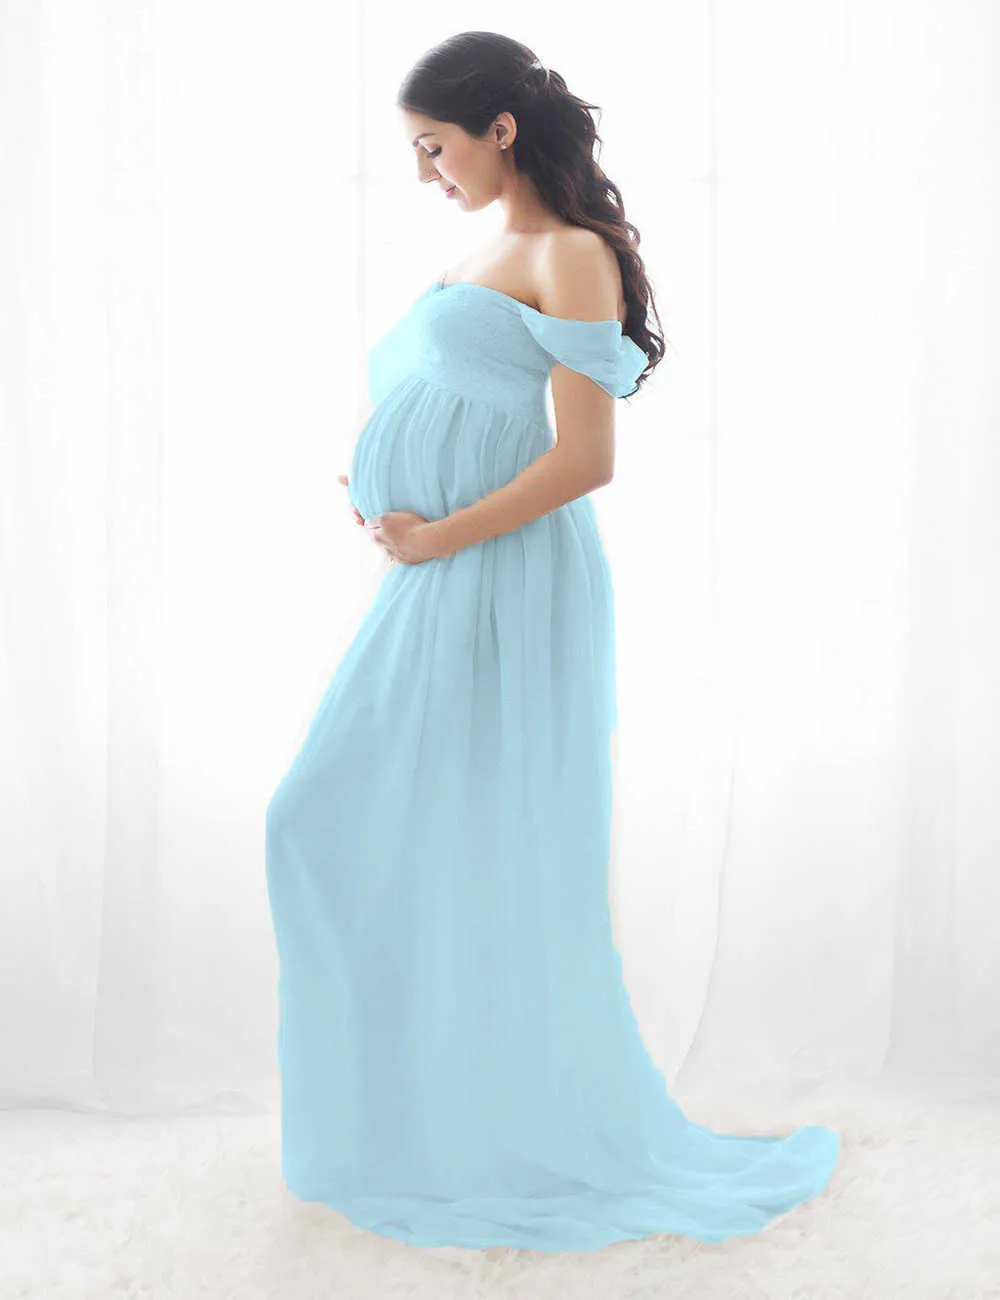 Shoulderless Maternity Dress For Photography Sexy Front Split Pregnancy Dresses For Women Maxi Maternity Gown Photo Shoots Props (7)